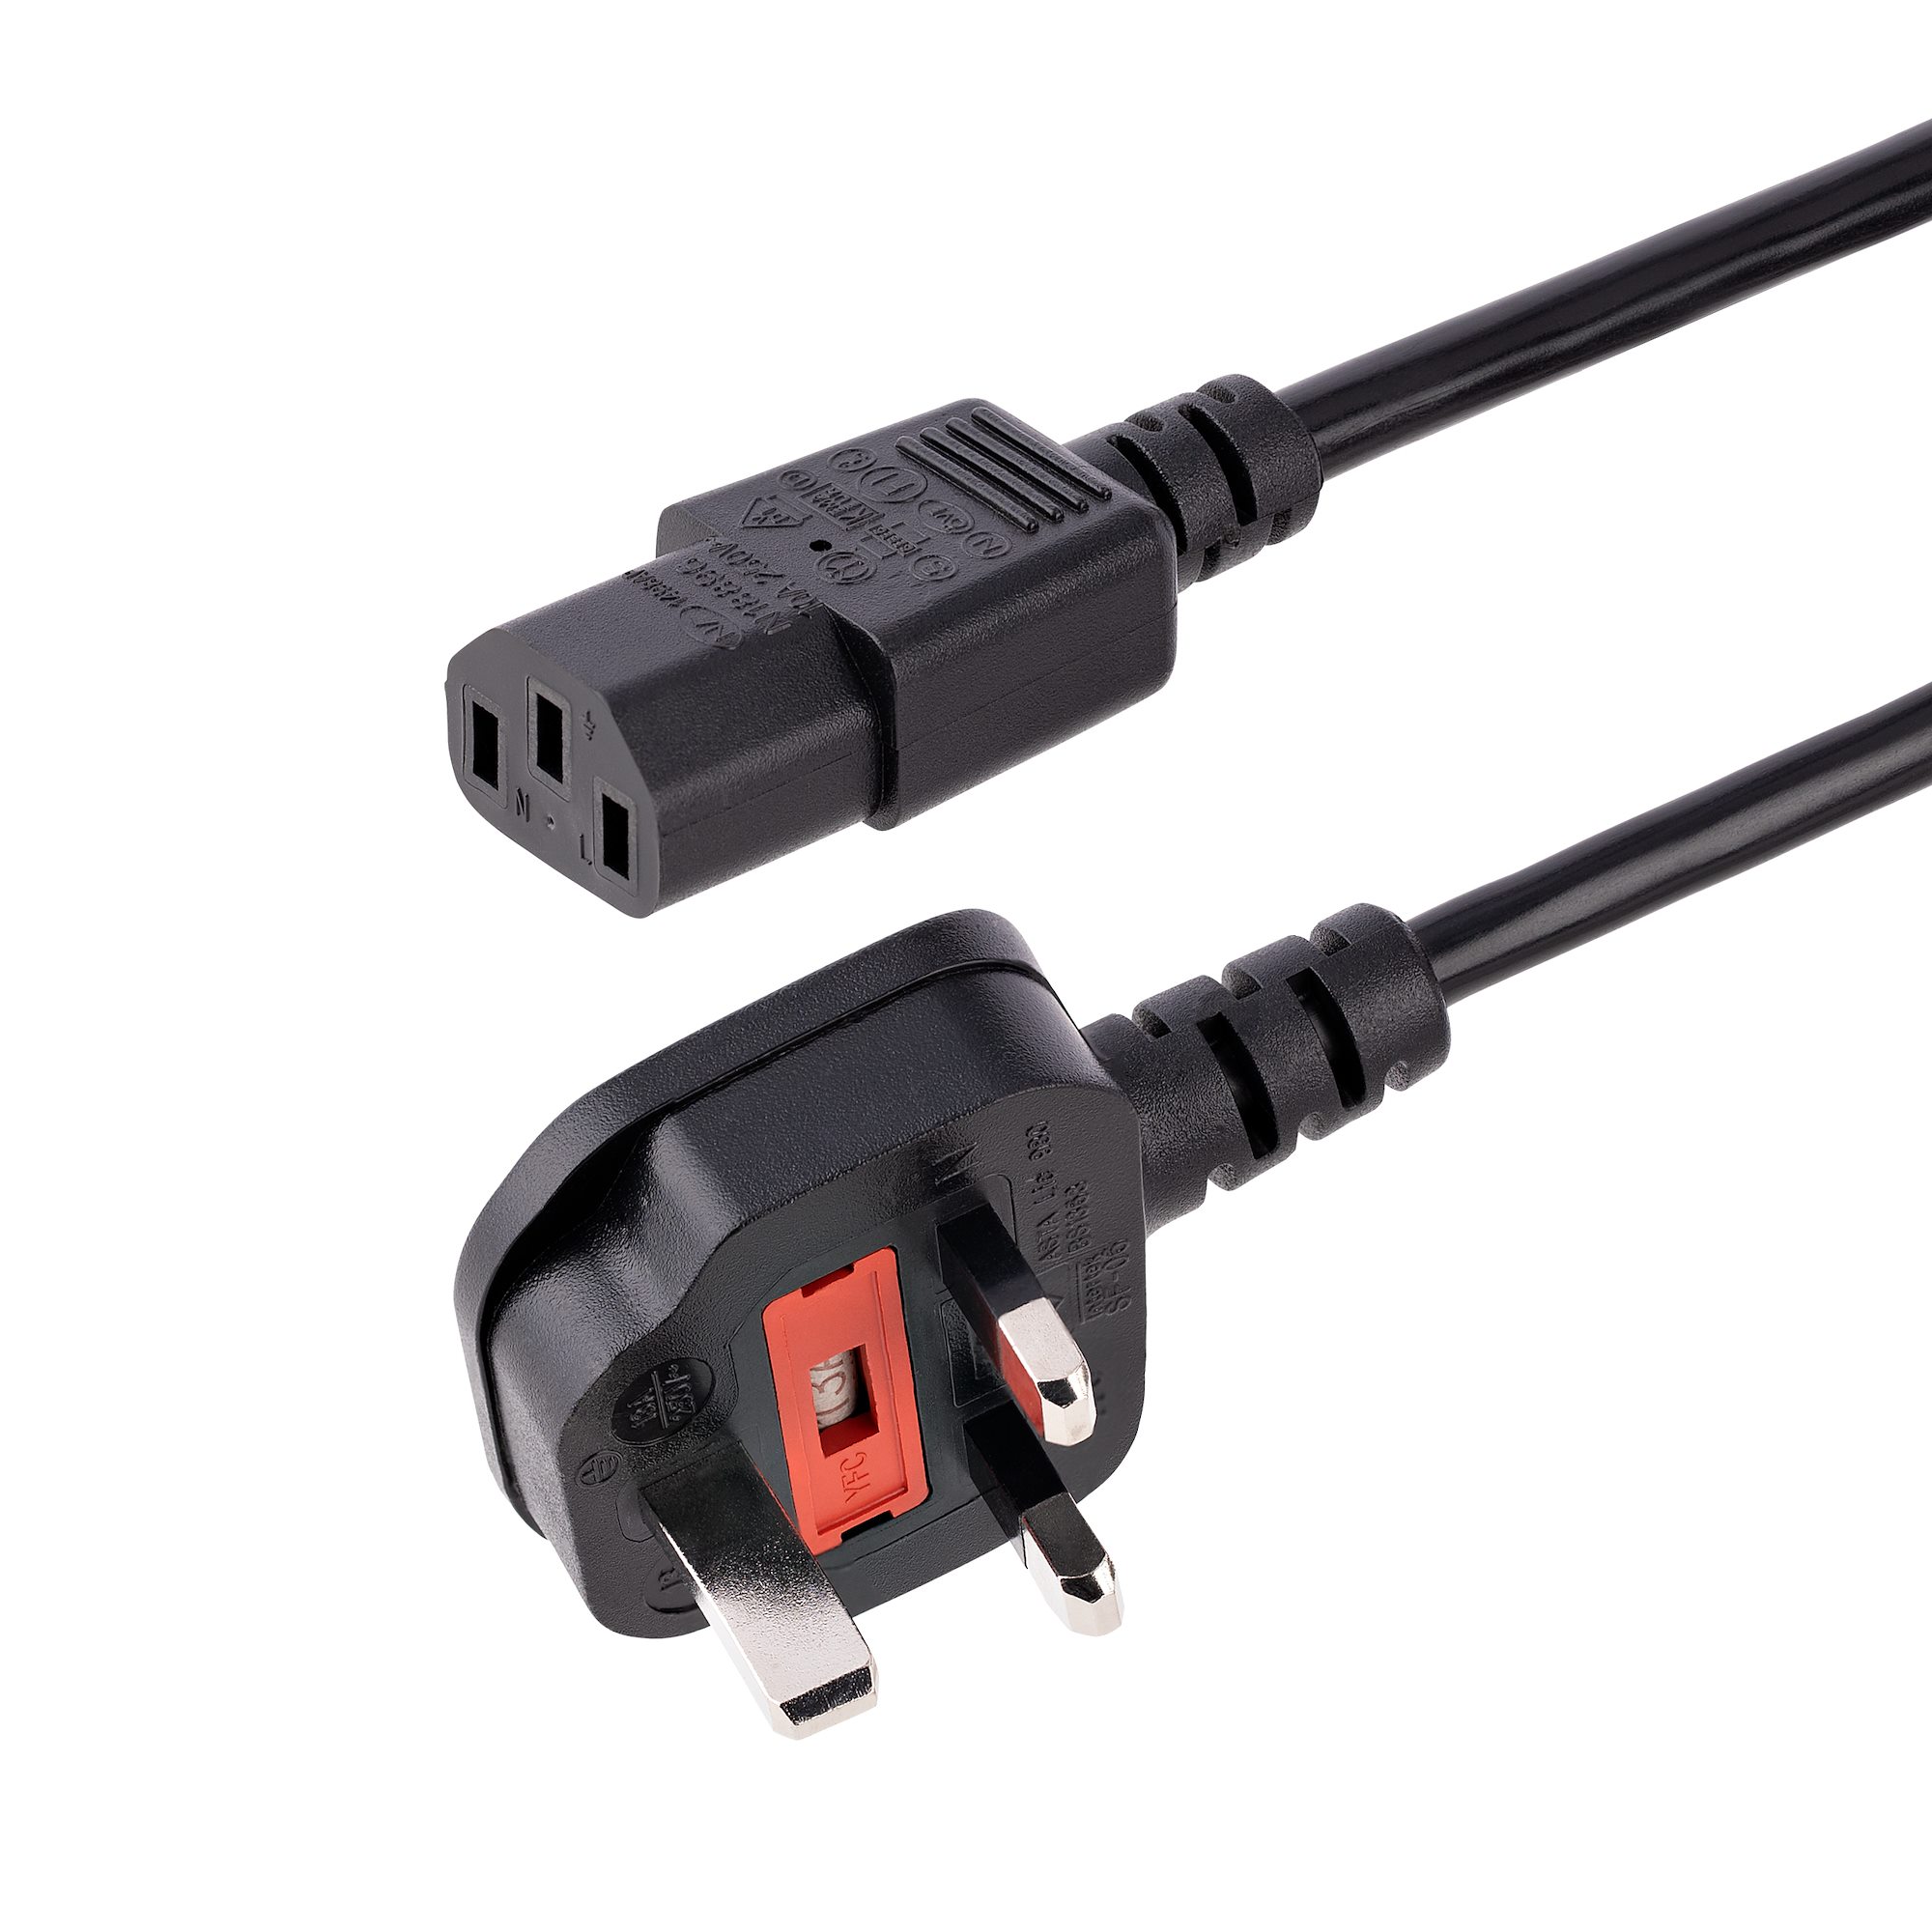 6ft (1.8m) UK Computer Power Cable, 18AWG, BS 1363 to C13, 10A 250V, Black  Replacement AC Power Cord, Kettle Lead / UK Power Cord, PC Power Supply